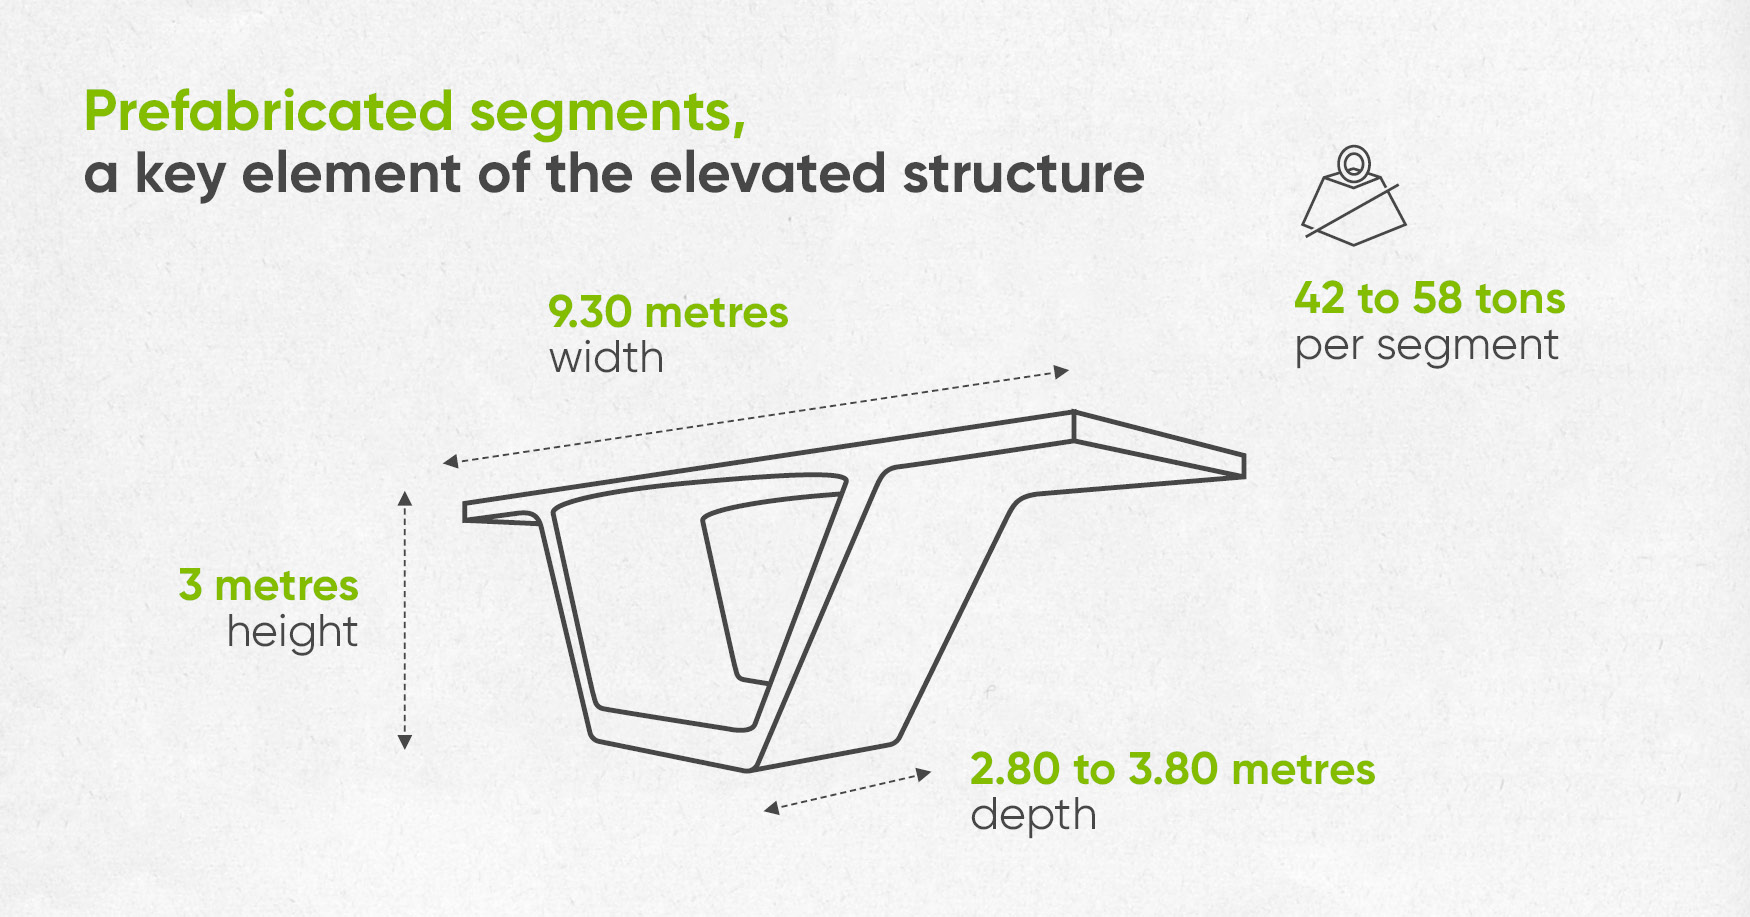 Prefabricated segments, a key element of the elevated structure